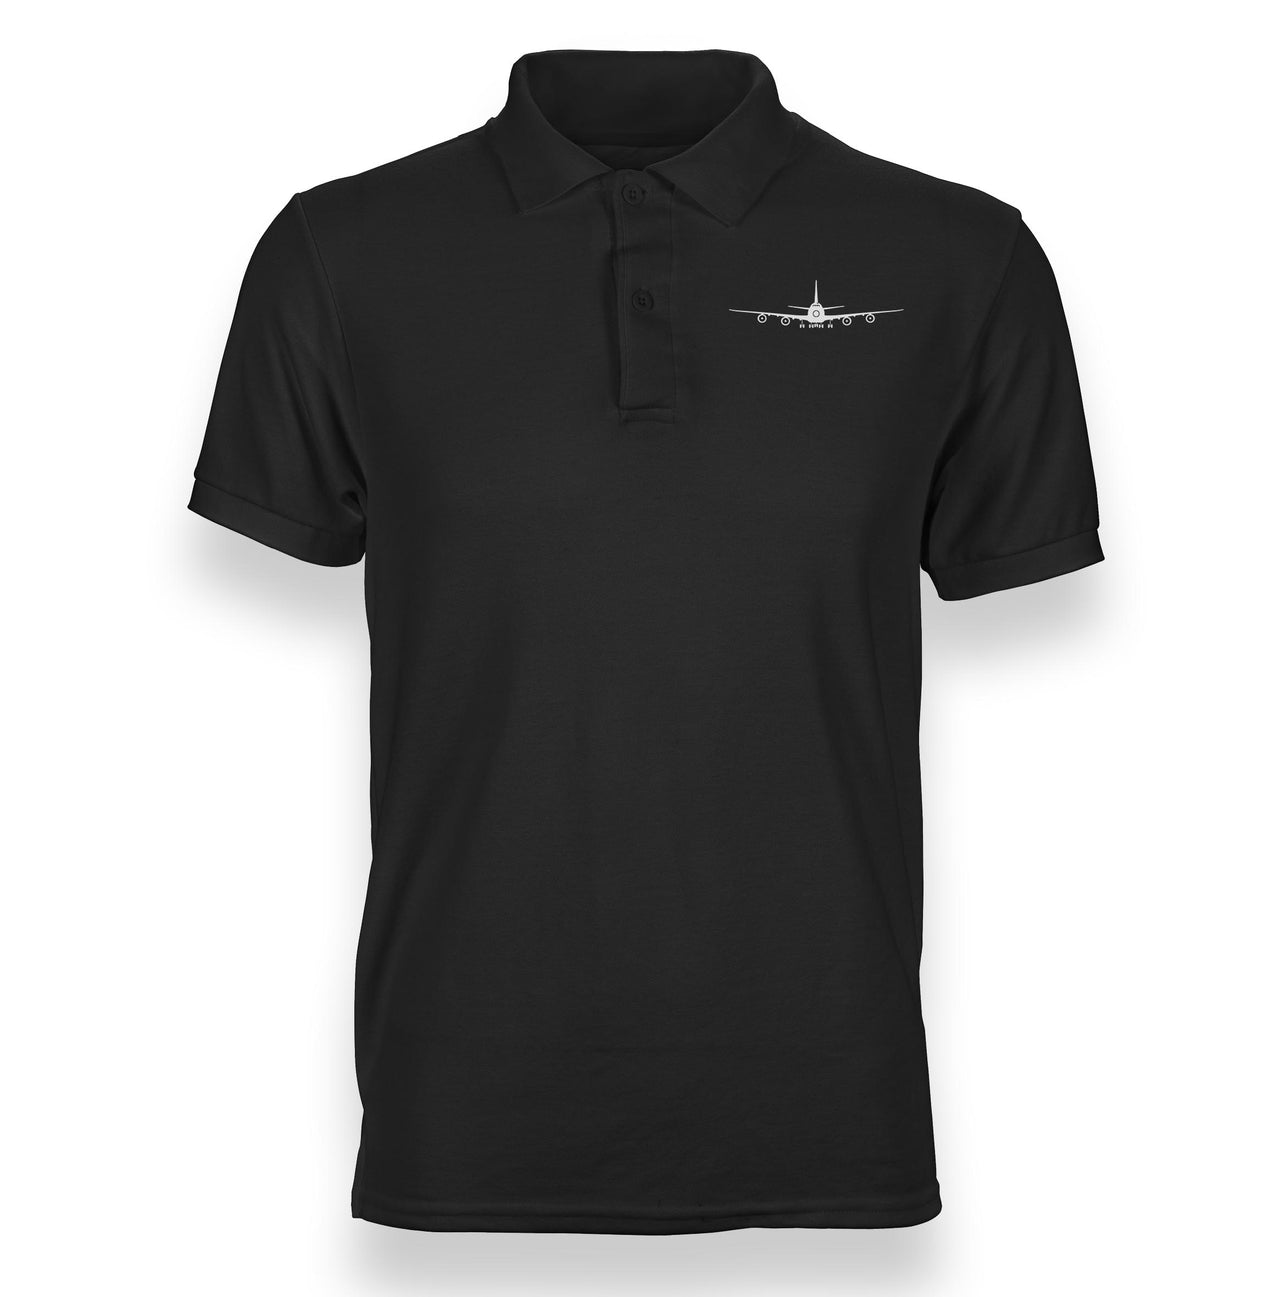 Boeing 747 Silhouette Designed Polo T-Shirts